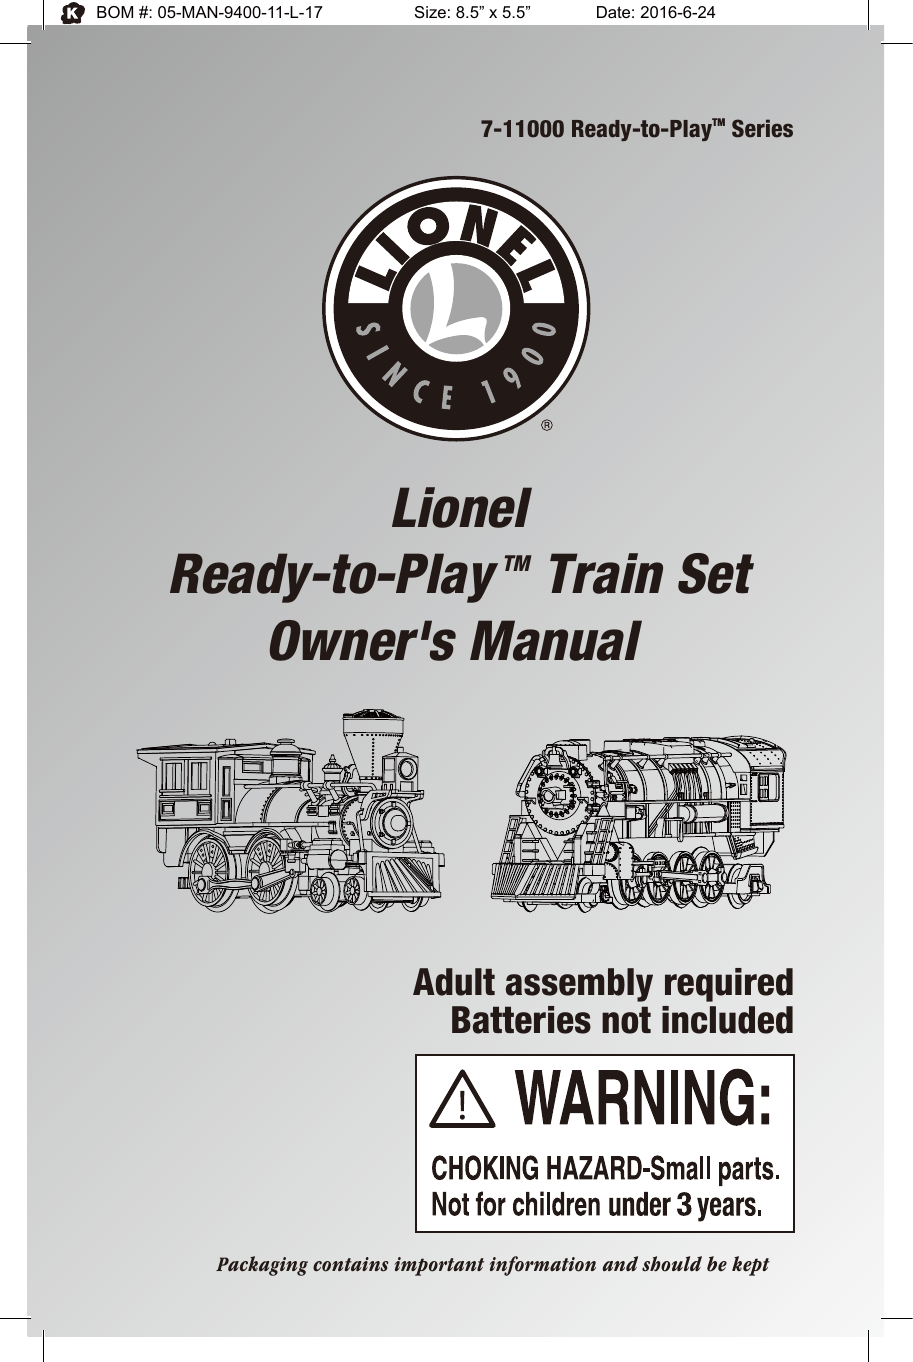 7-11000 Ready-to-PlayTM SeriesLionelReady-to-Play TM Train SetOwner&apos;s Manual Adult assembly requiredBatteries not includedPackaging contains important information and should be keptBOM #: 05-MAN-9400-11-L-17     Size: 8.5” x 5.5”    Date: 2016-6-24